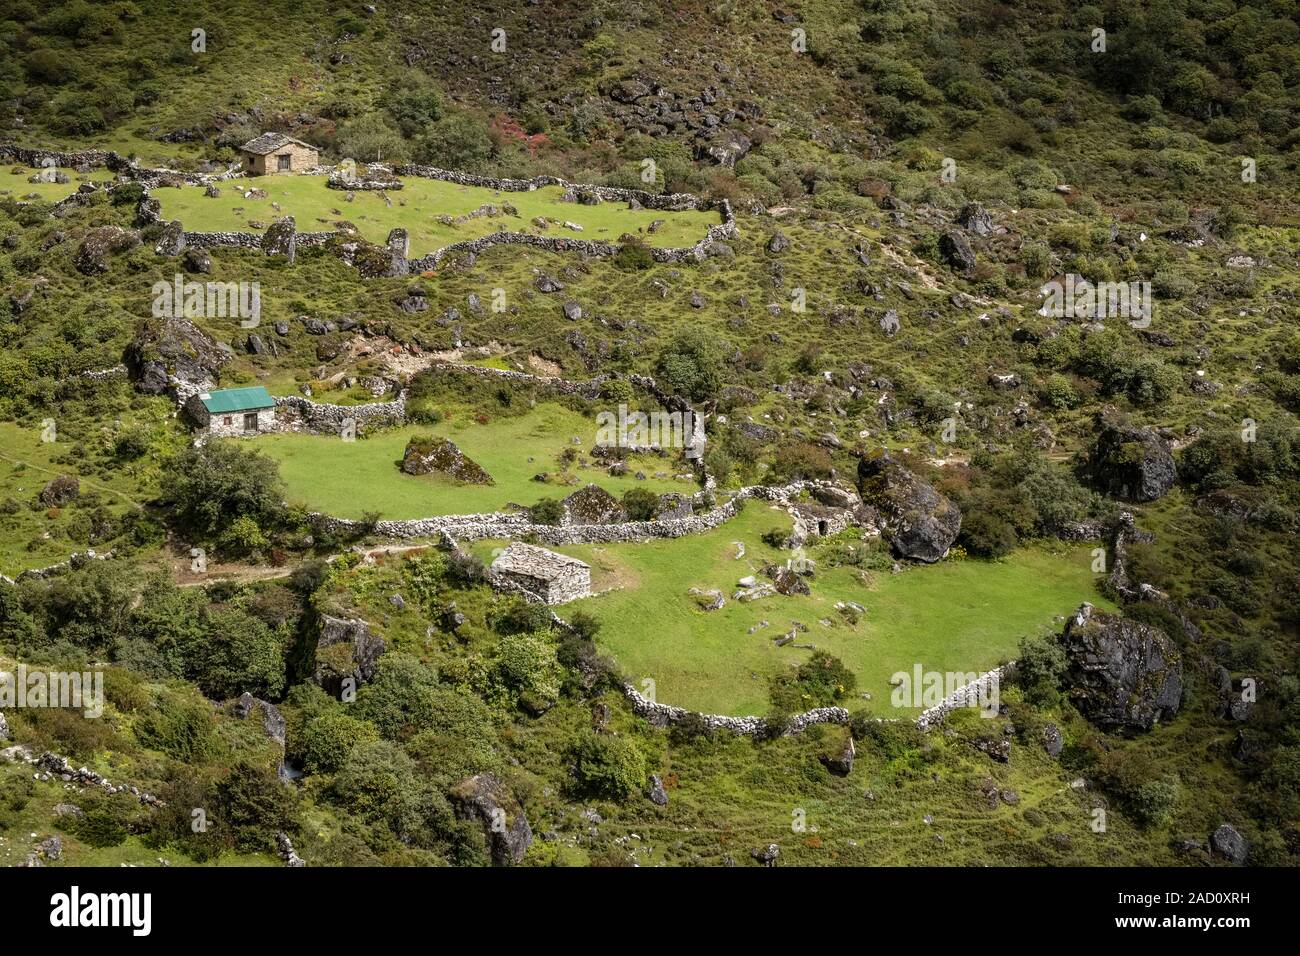 Farmers houses, surrounding fields framed by stone walls, located in Gokyo valley Stock Photo